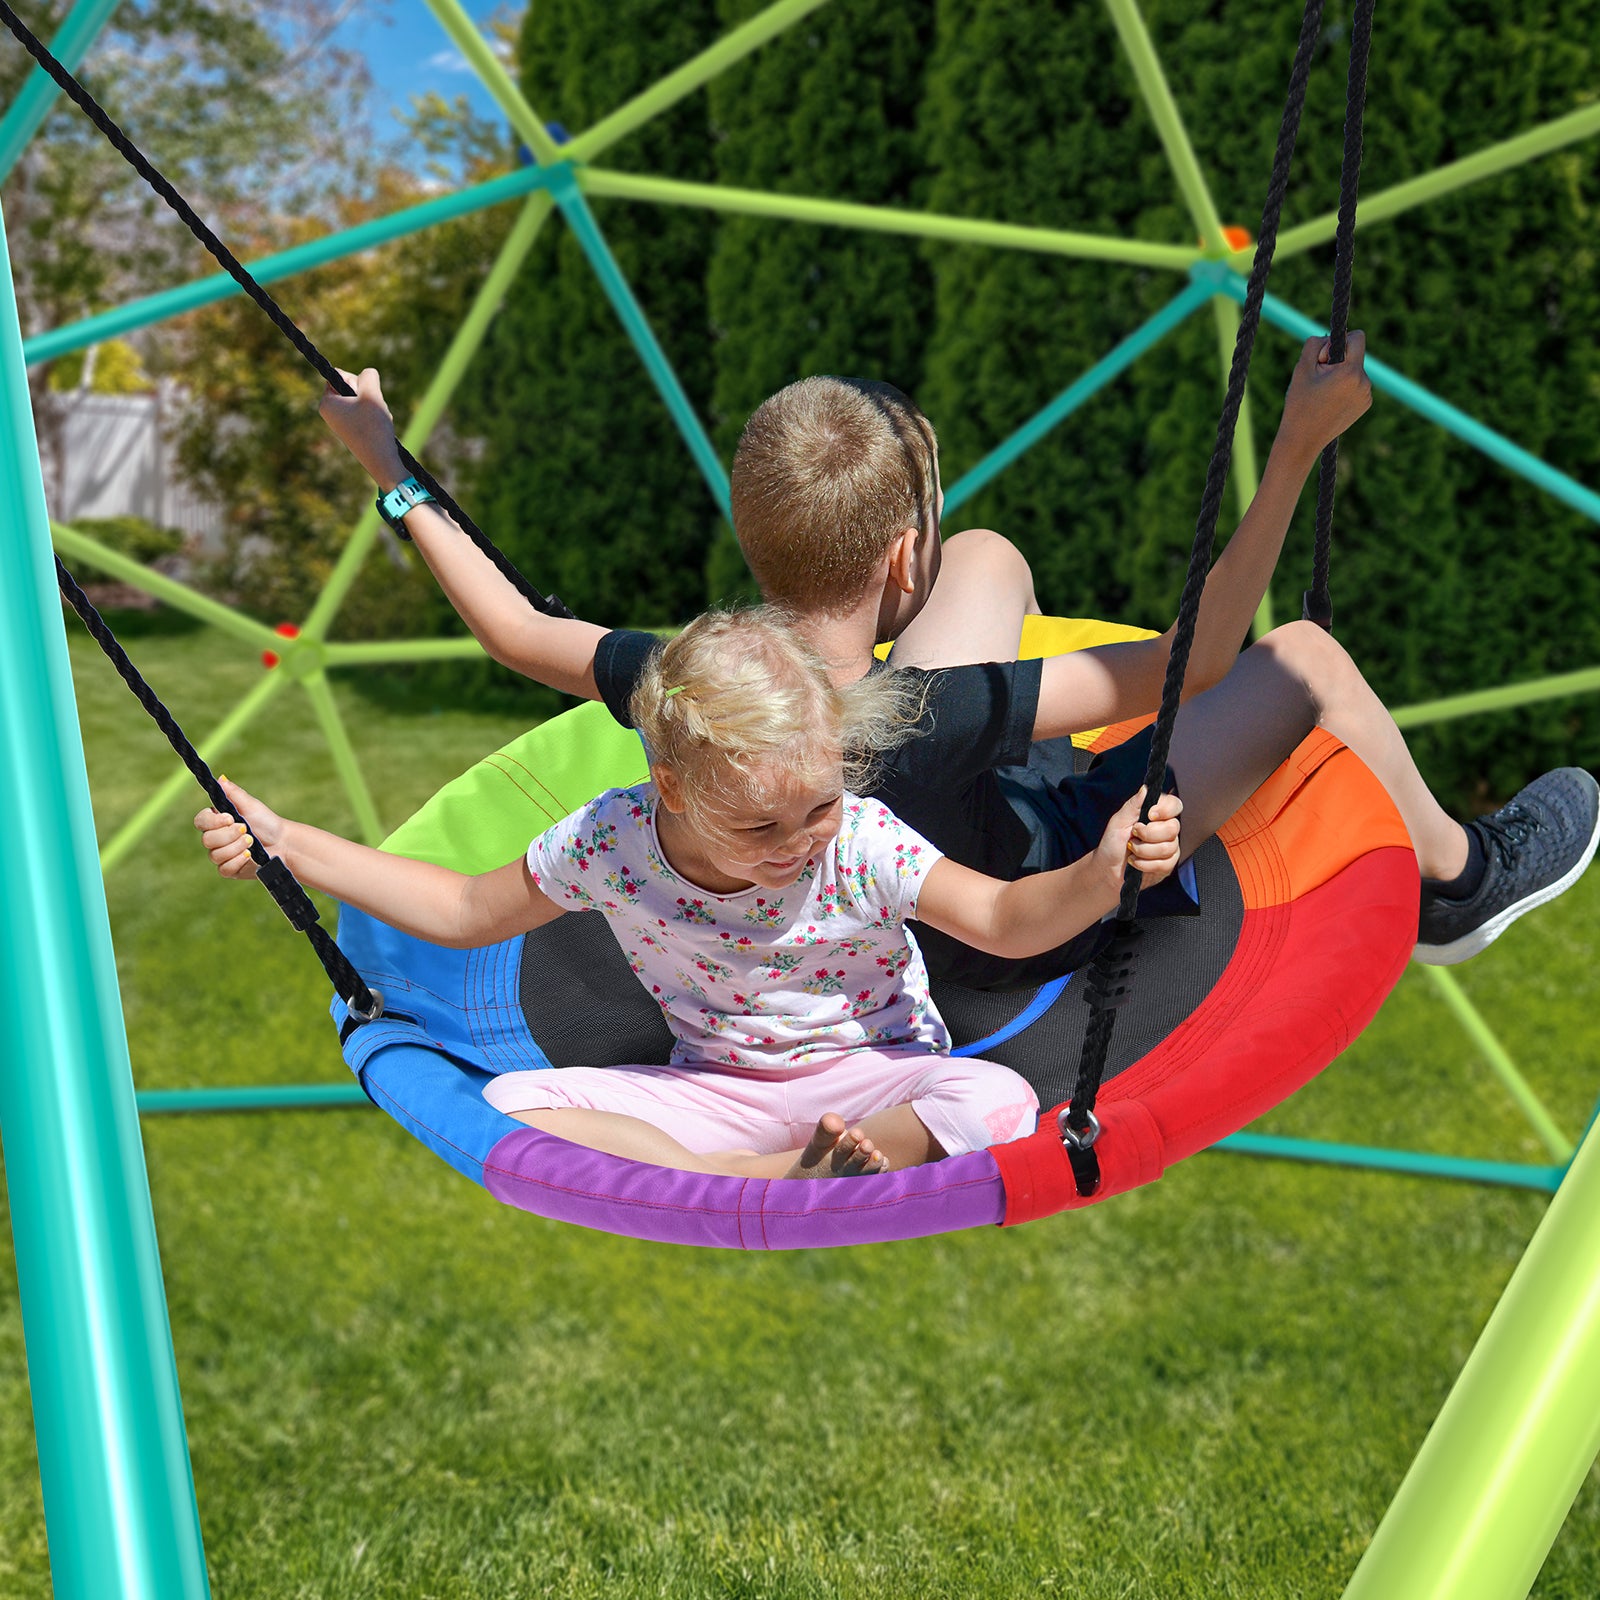 10ft Climbing Dome Swing Set with Saucer Swing, Jungle Gym for Kids Outdoor Backyard, Supports 800lbs